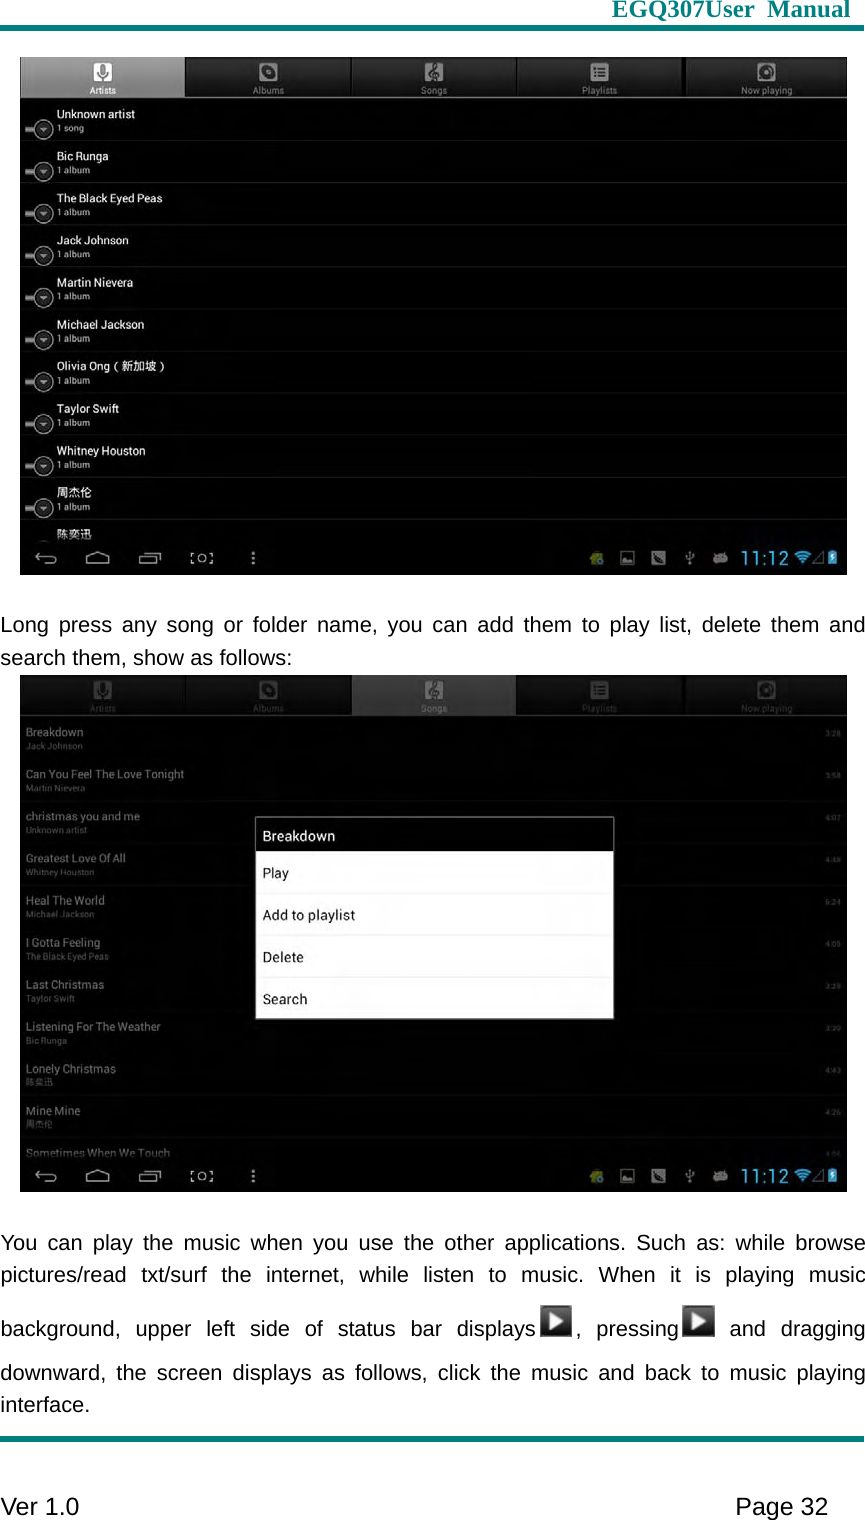                     EGQ307User Manual     Ver 1.0    Page 32    Long press any song or folder name, you can add them to play list, delete them and search them, show as follows:   You can play the music when you use the other applications. Such as: while browse pictures/read txt/surf the internet, while listen to music. When it is playing music background, upper left side of status bar displays , pressing  and  dragging downward, the screen displays as follows, click the music and back to music playing interface. 